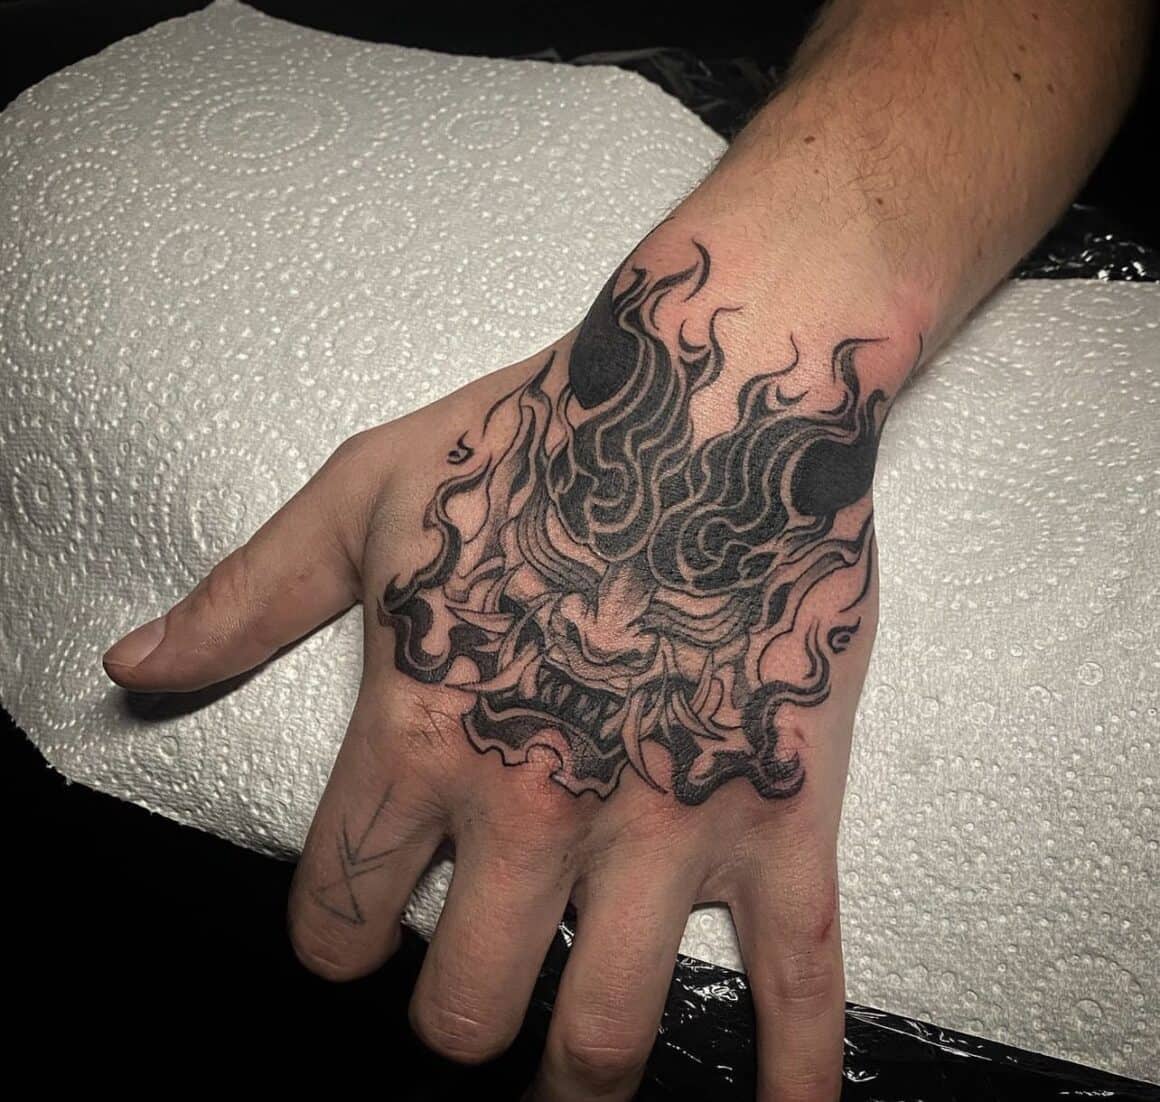 20 Hand Tattoos For Men That Leave A Lasting Impression • Body Artifact